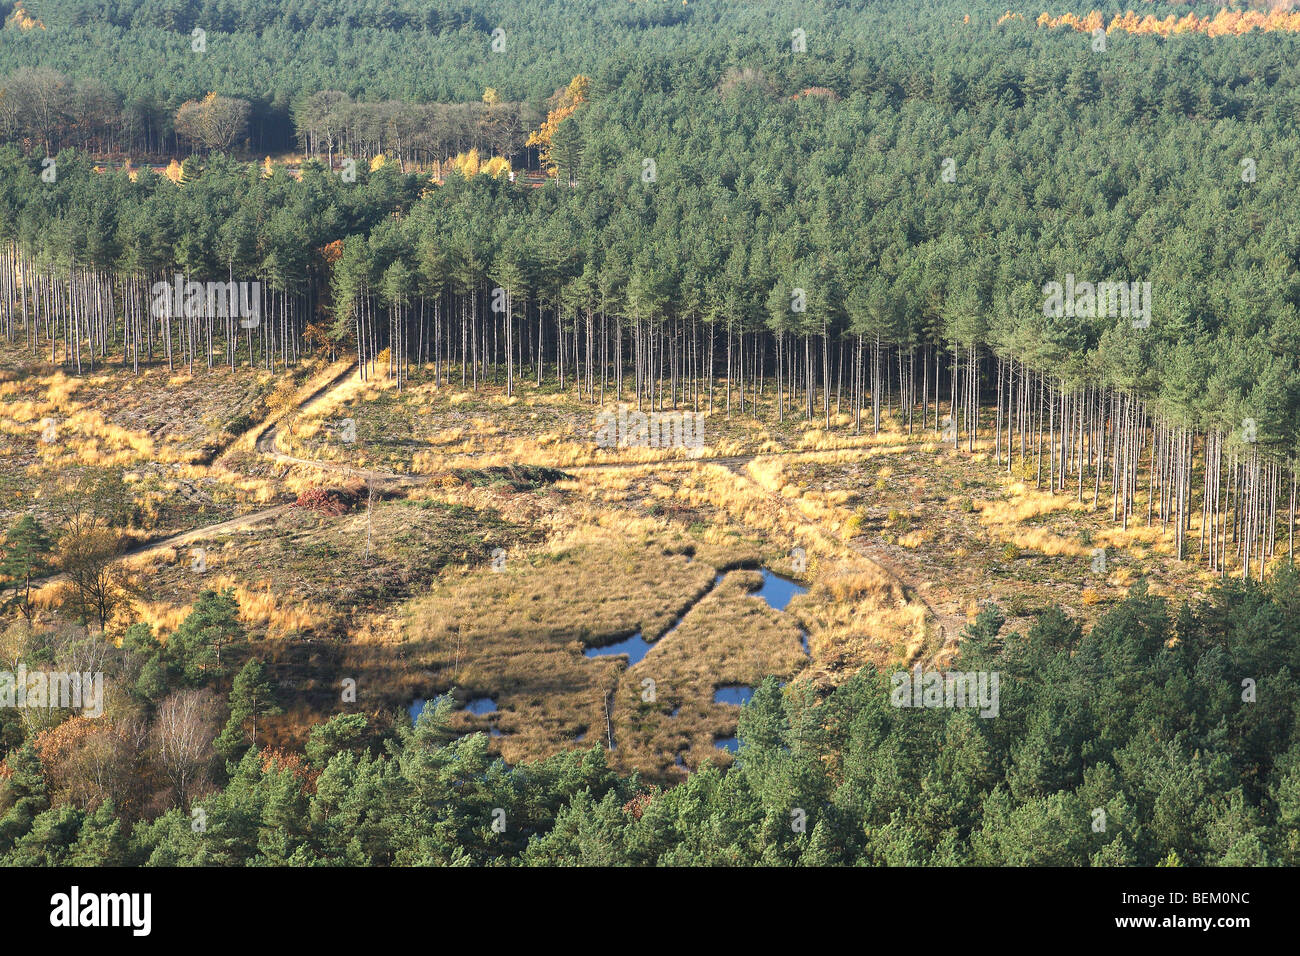 Deforestation of pine forest, forest transformation and development of heather with pool, Belgium Stock Photo